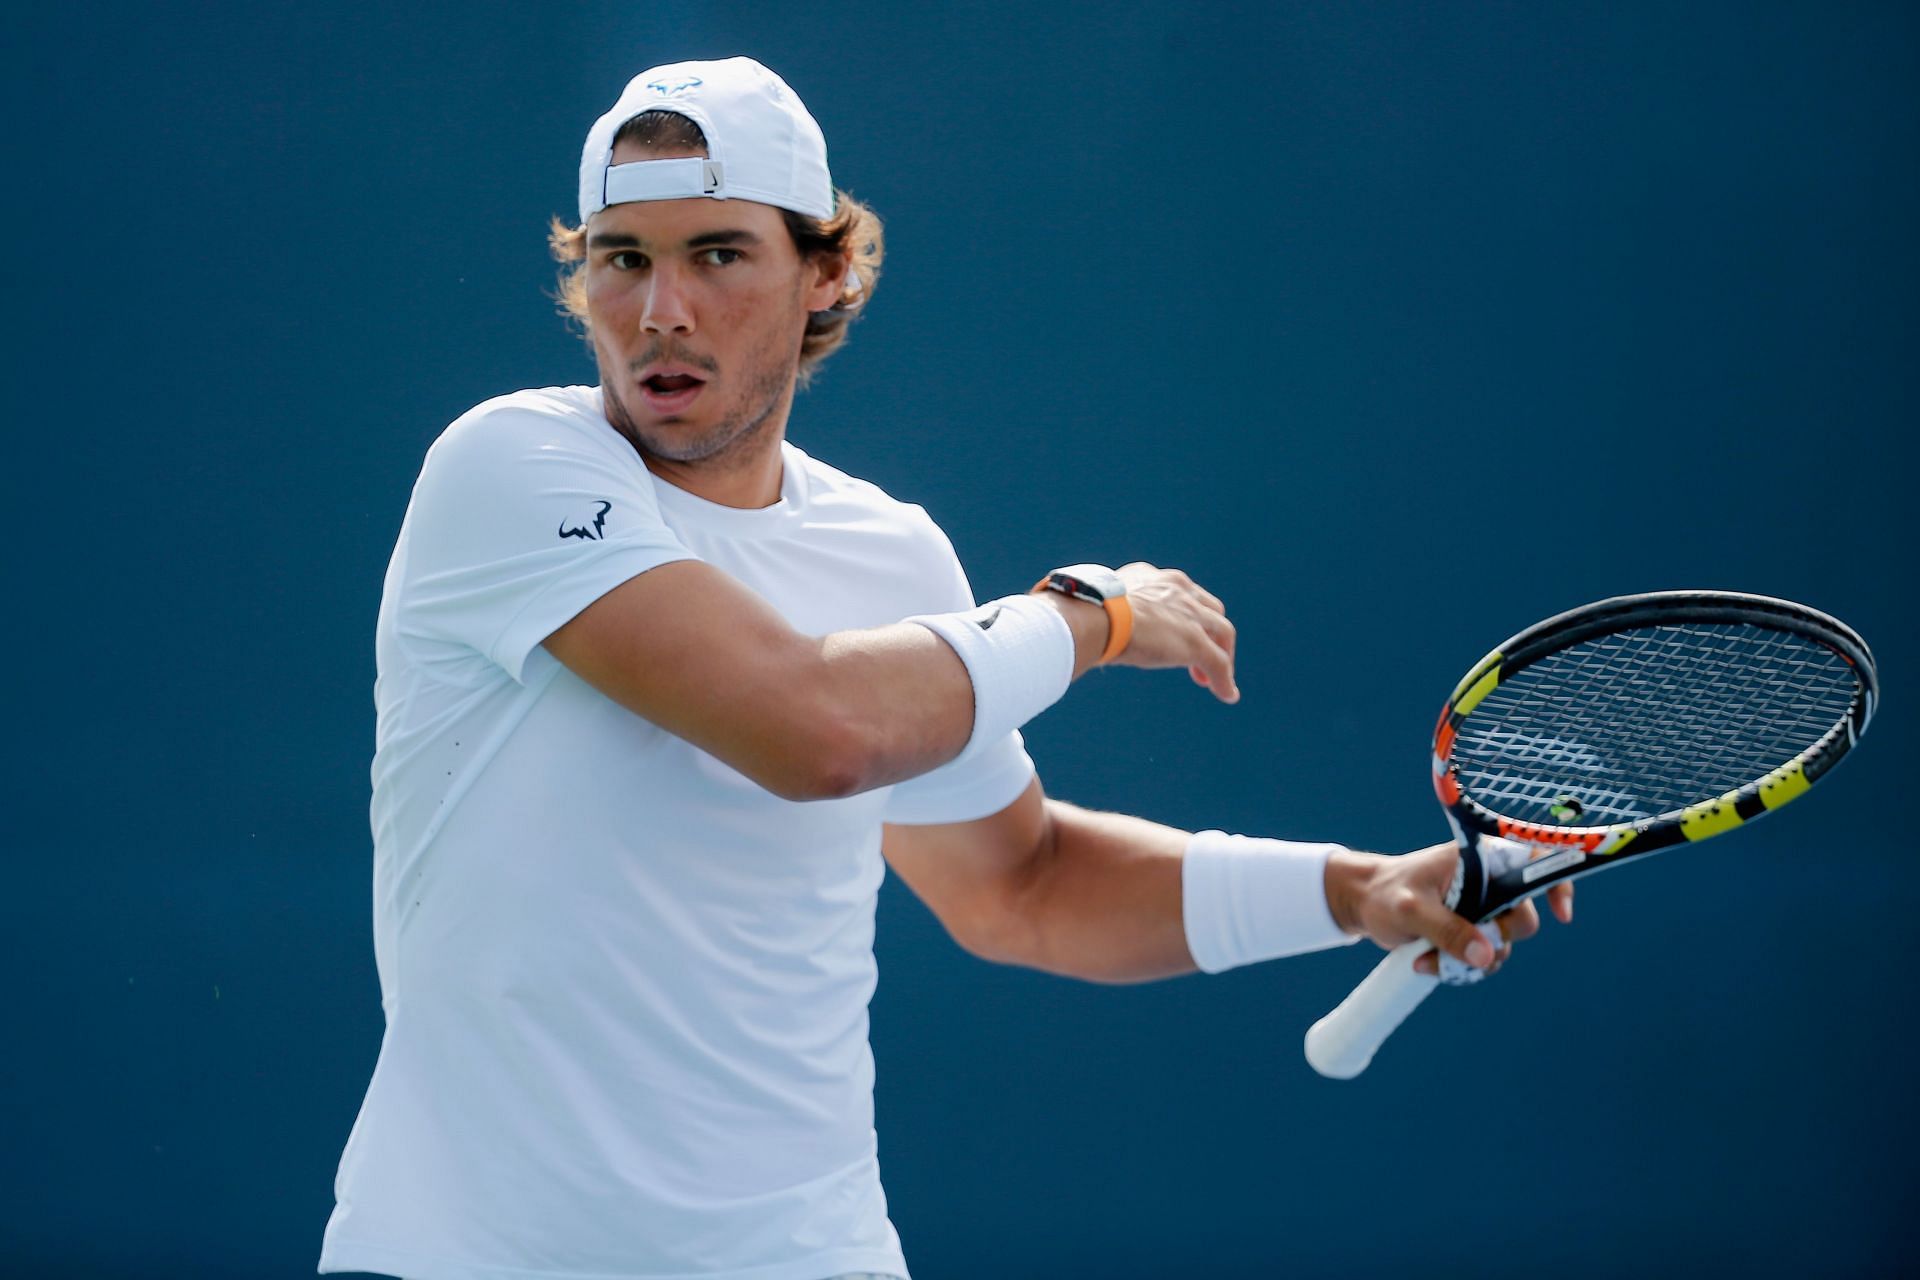 Rafael Nadal will be looking to win his second Cincinnati Masters title this year